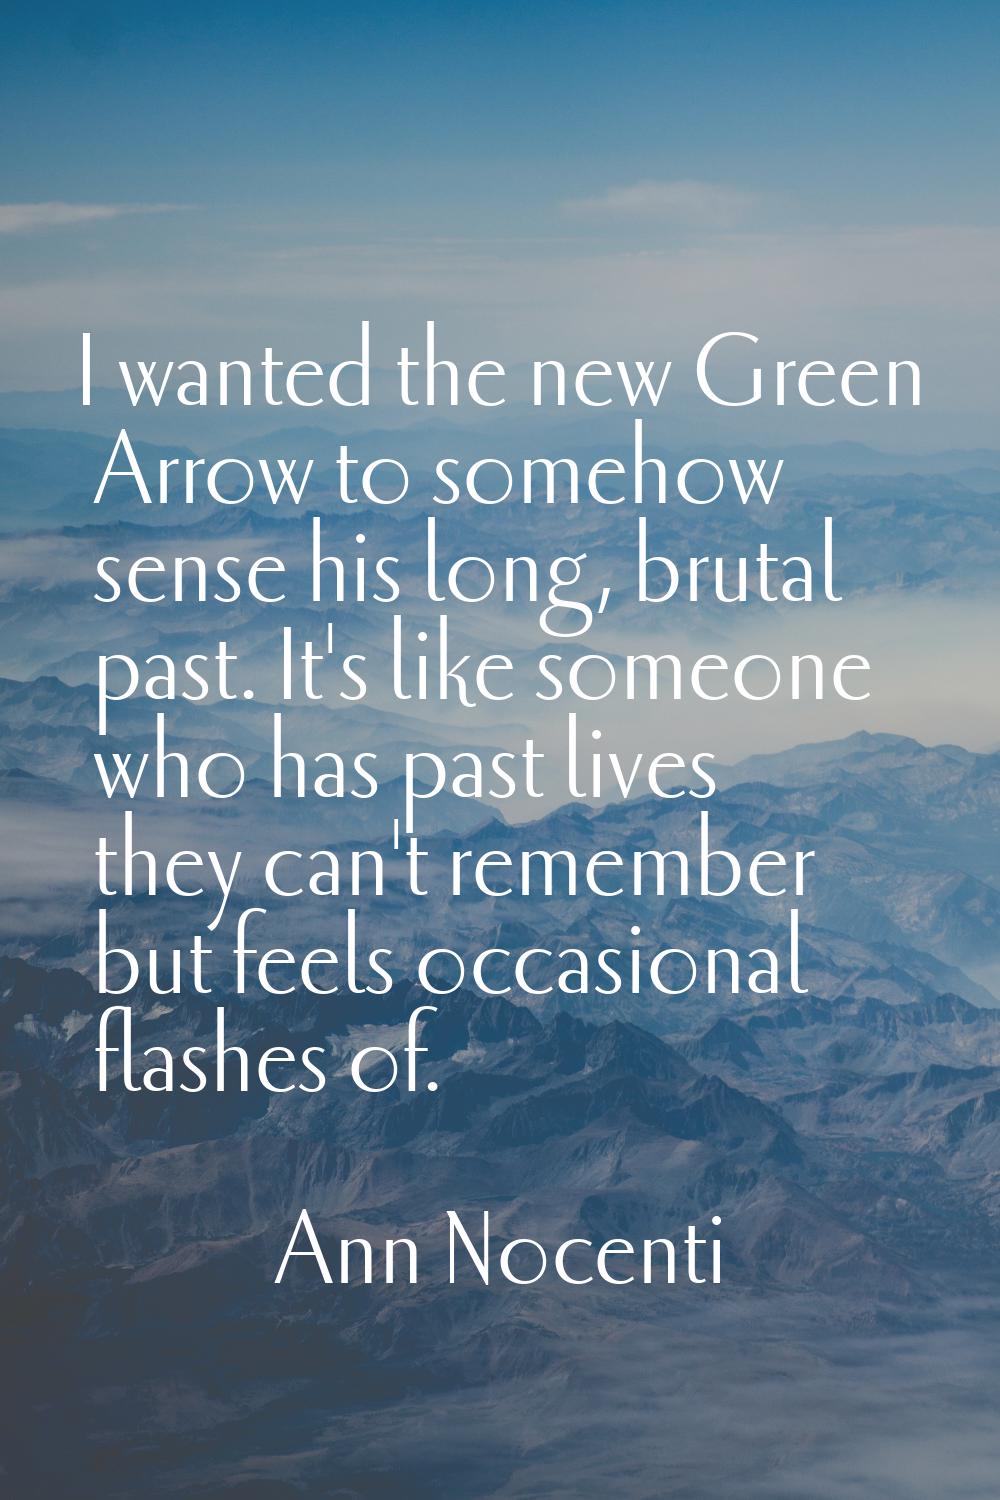 I wanted the new Green Arrow to somehow sense his long, brutal past. It's like someone who has past